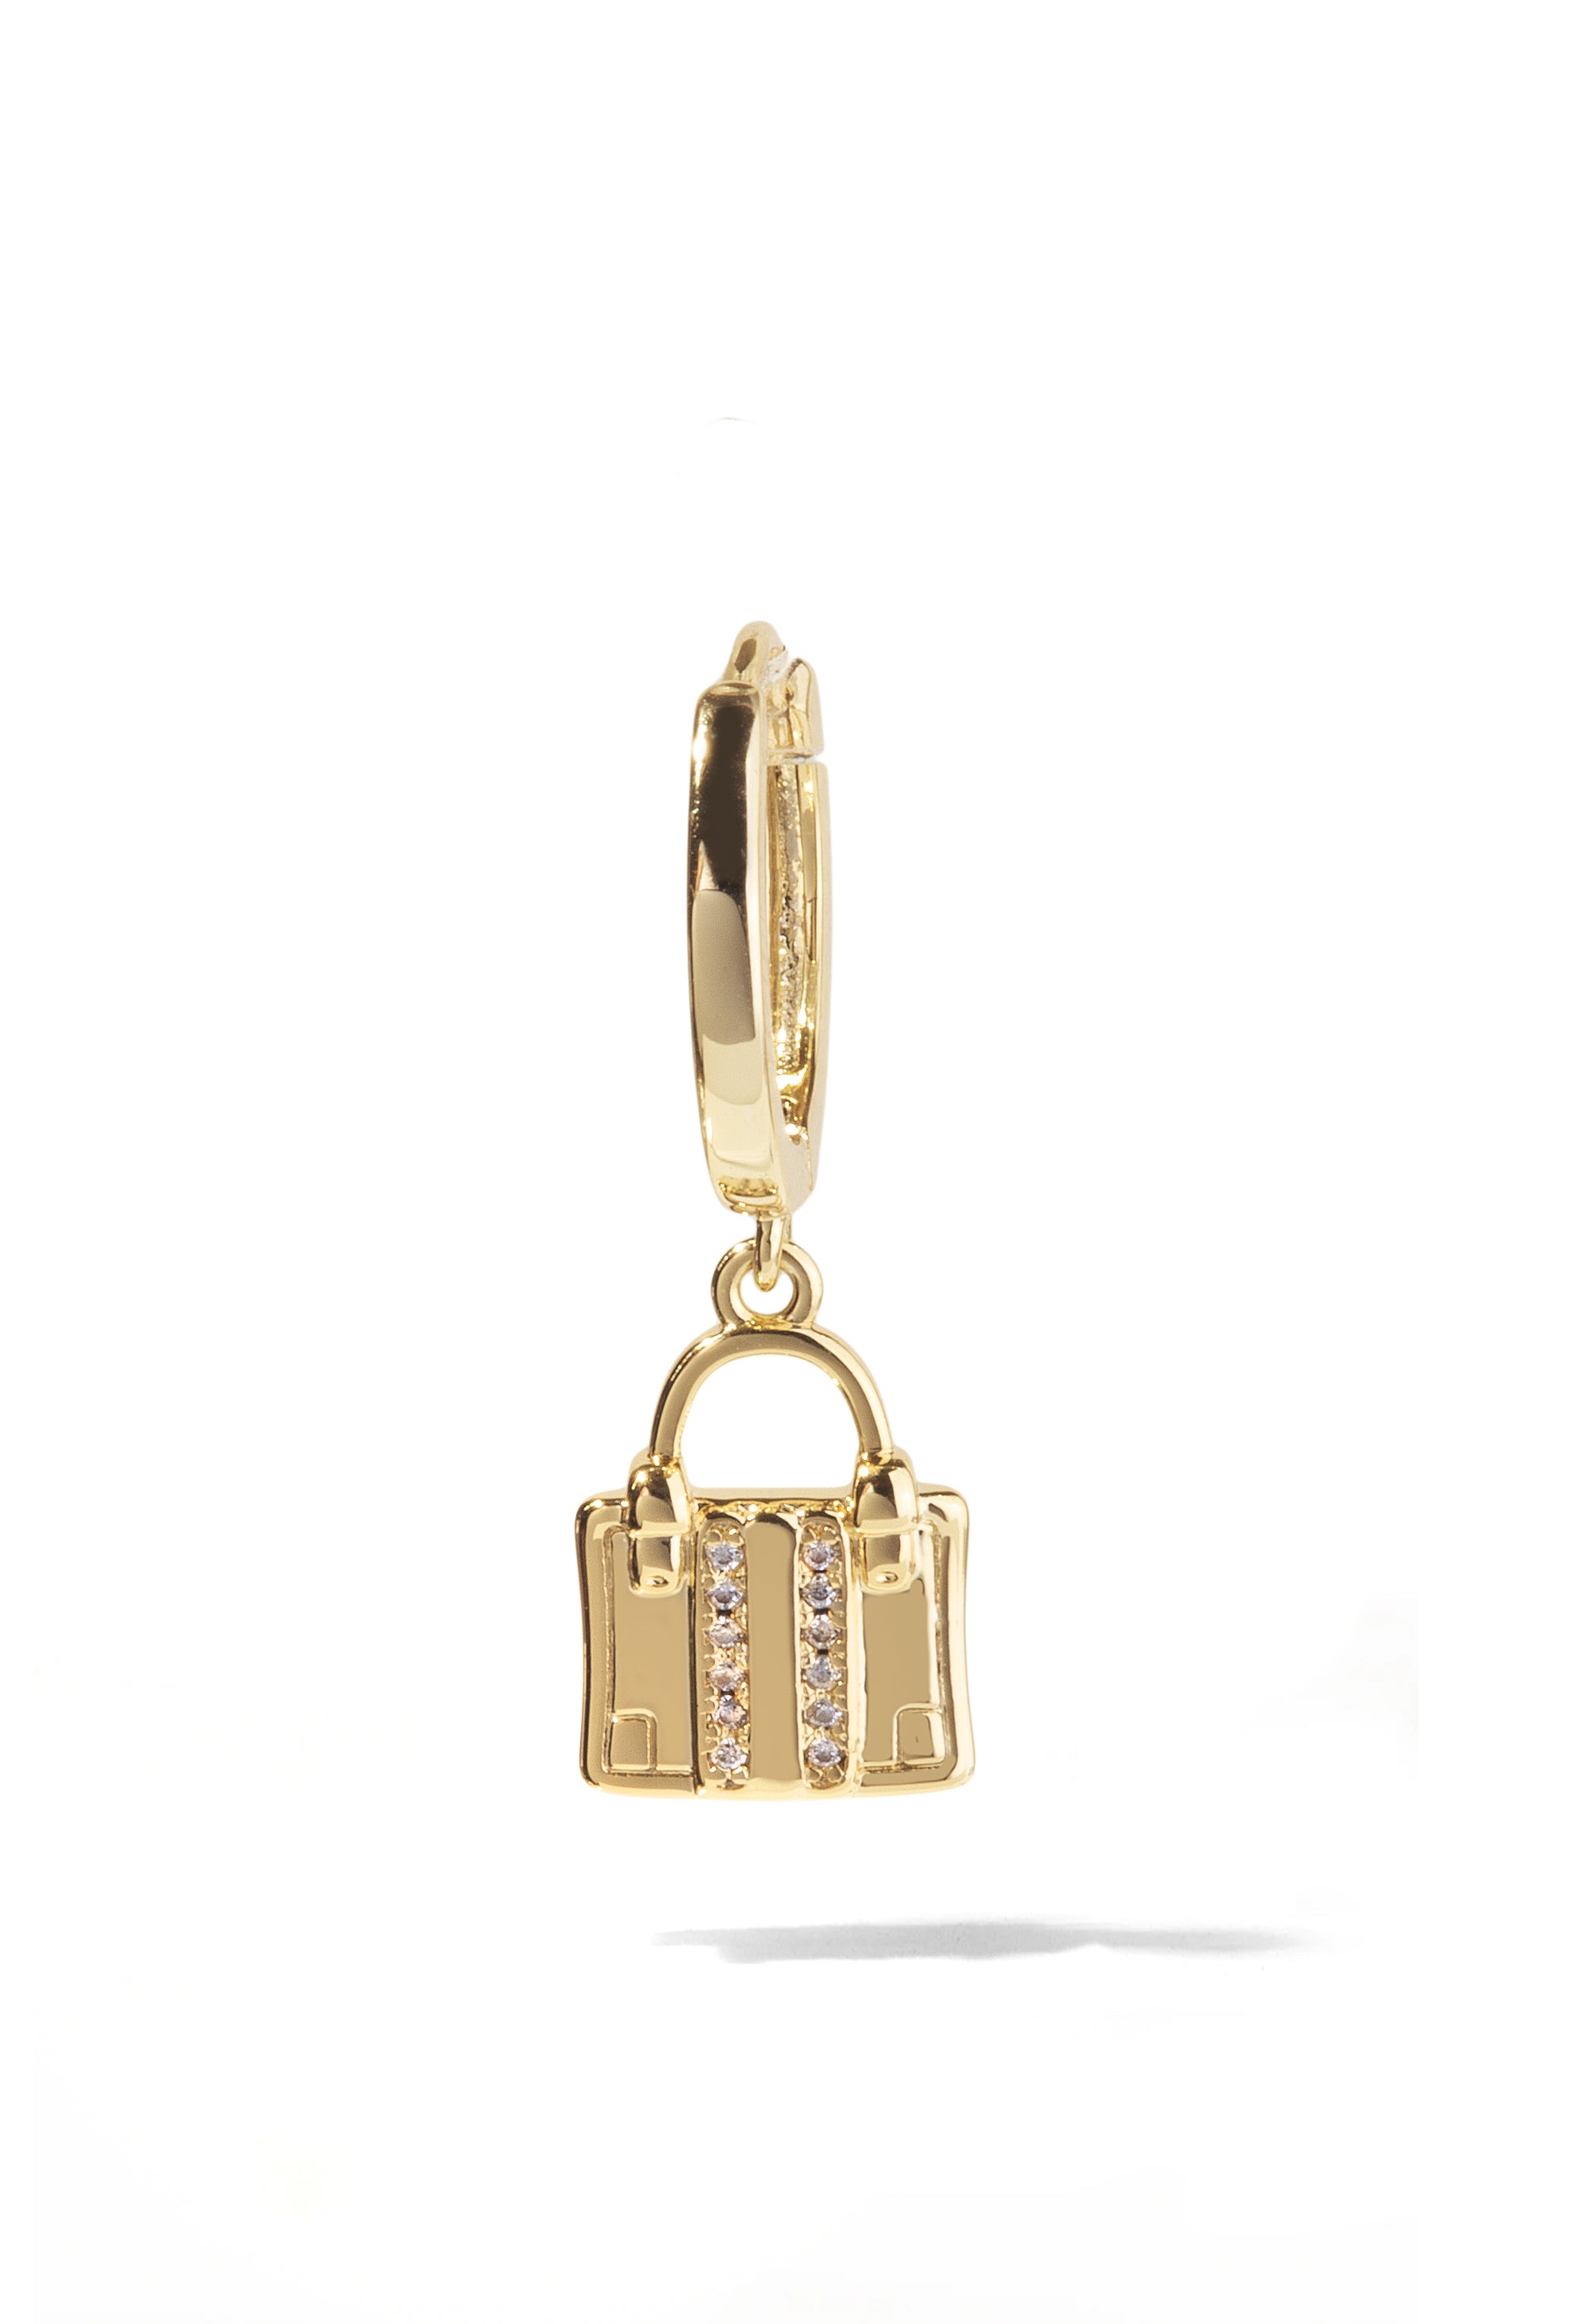 Travel Huggie Gold Charm Earring with Pavé Crystals on a Cuff Hoop